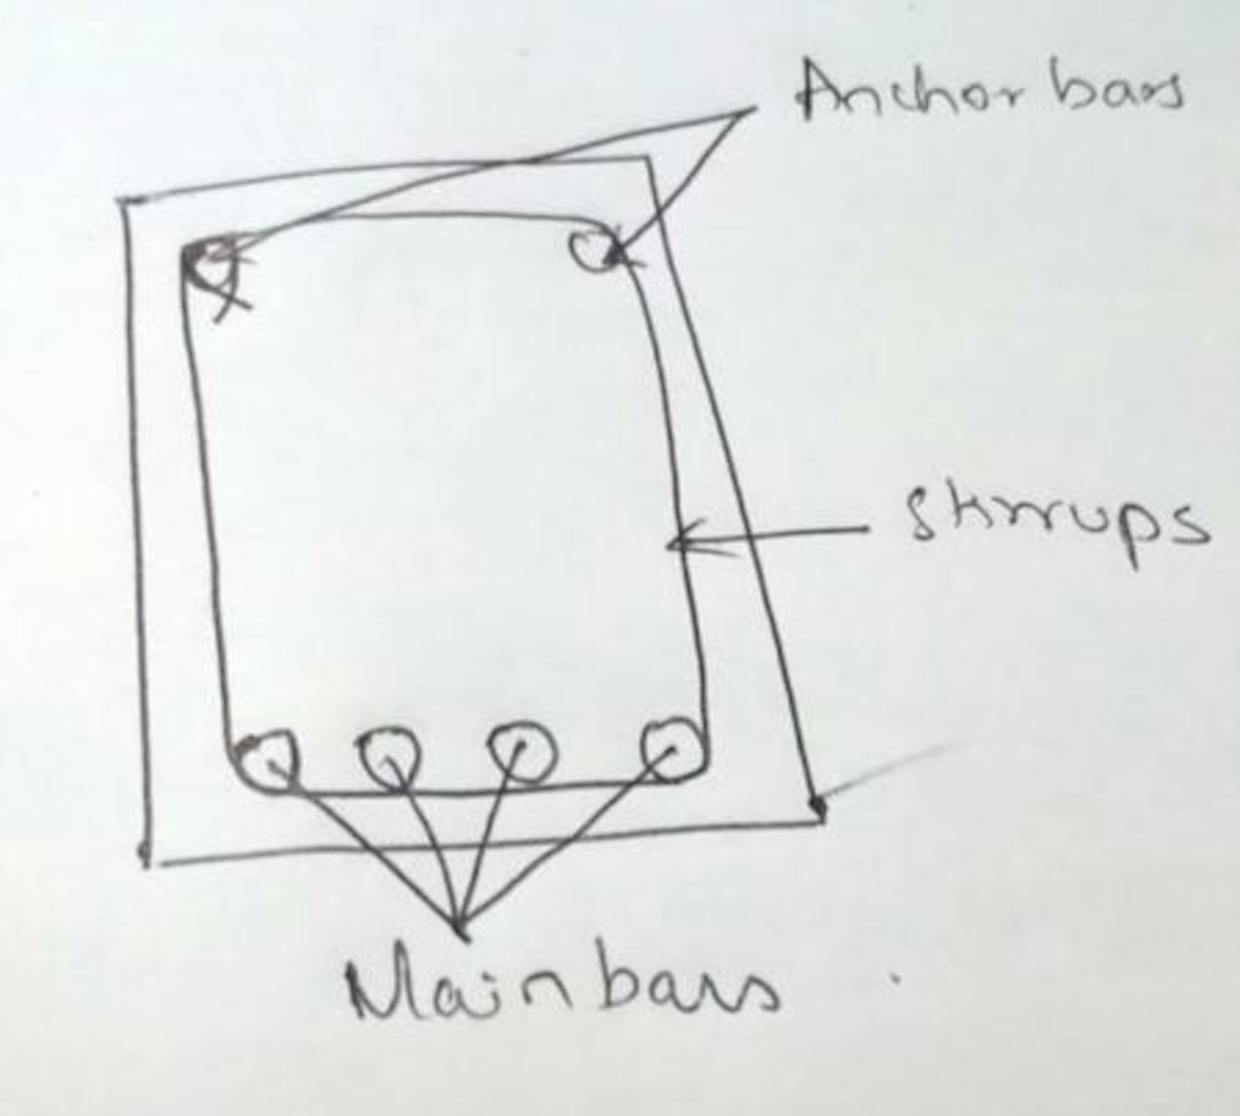 Why we provide Anchor Bar in a single RC beam?